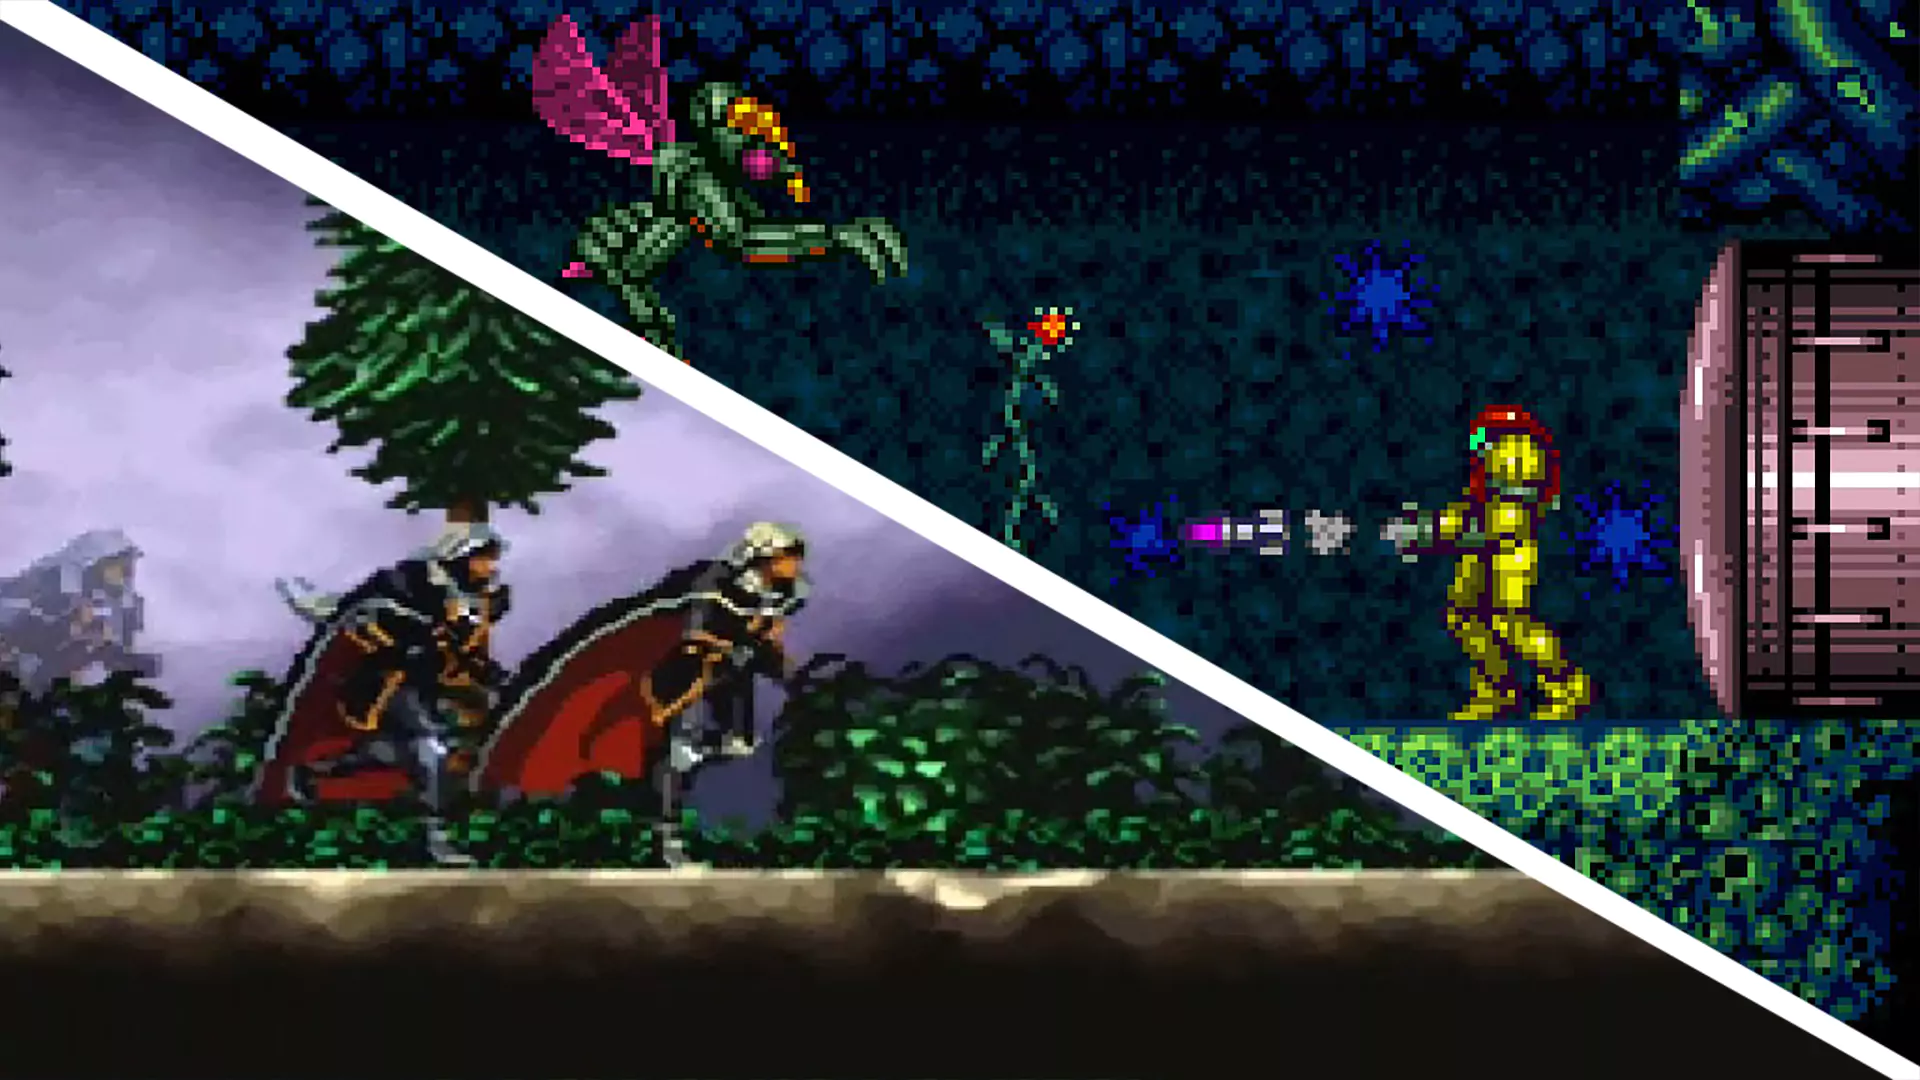 On the bottom-left is Alucard from Castlevania: Symphony of the Night walking towards the right in a field with trees, and, on the top-right, is Samus from Super Metroid shooting her blaster towards the left in an area with a flying enemy nearby.